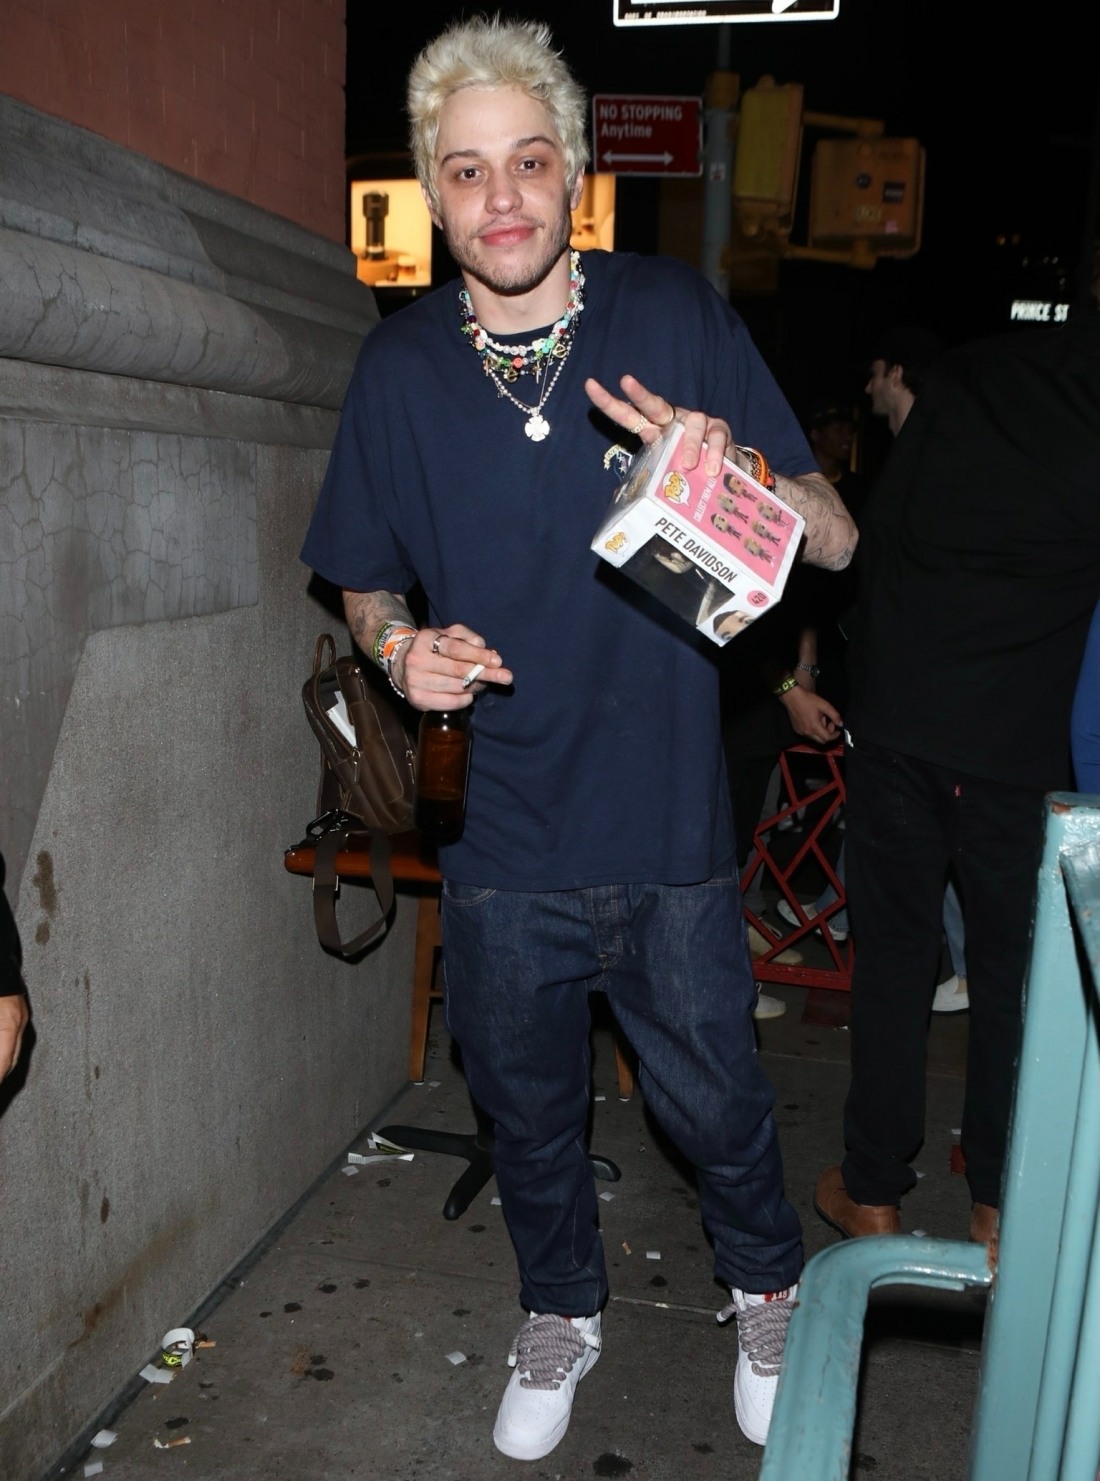 Pete Davidson enjoys a cigarette while out partying in NYC